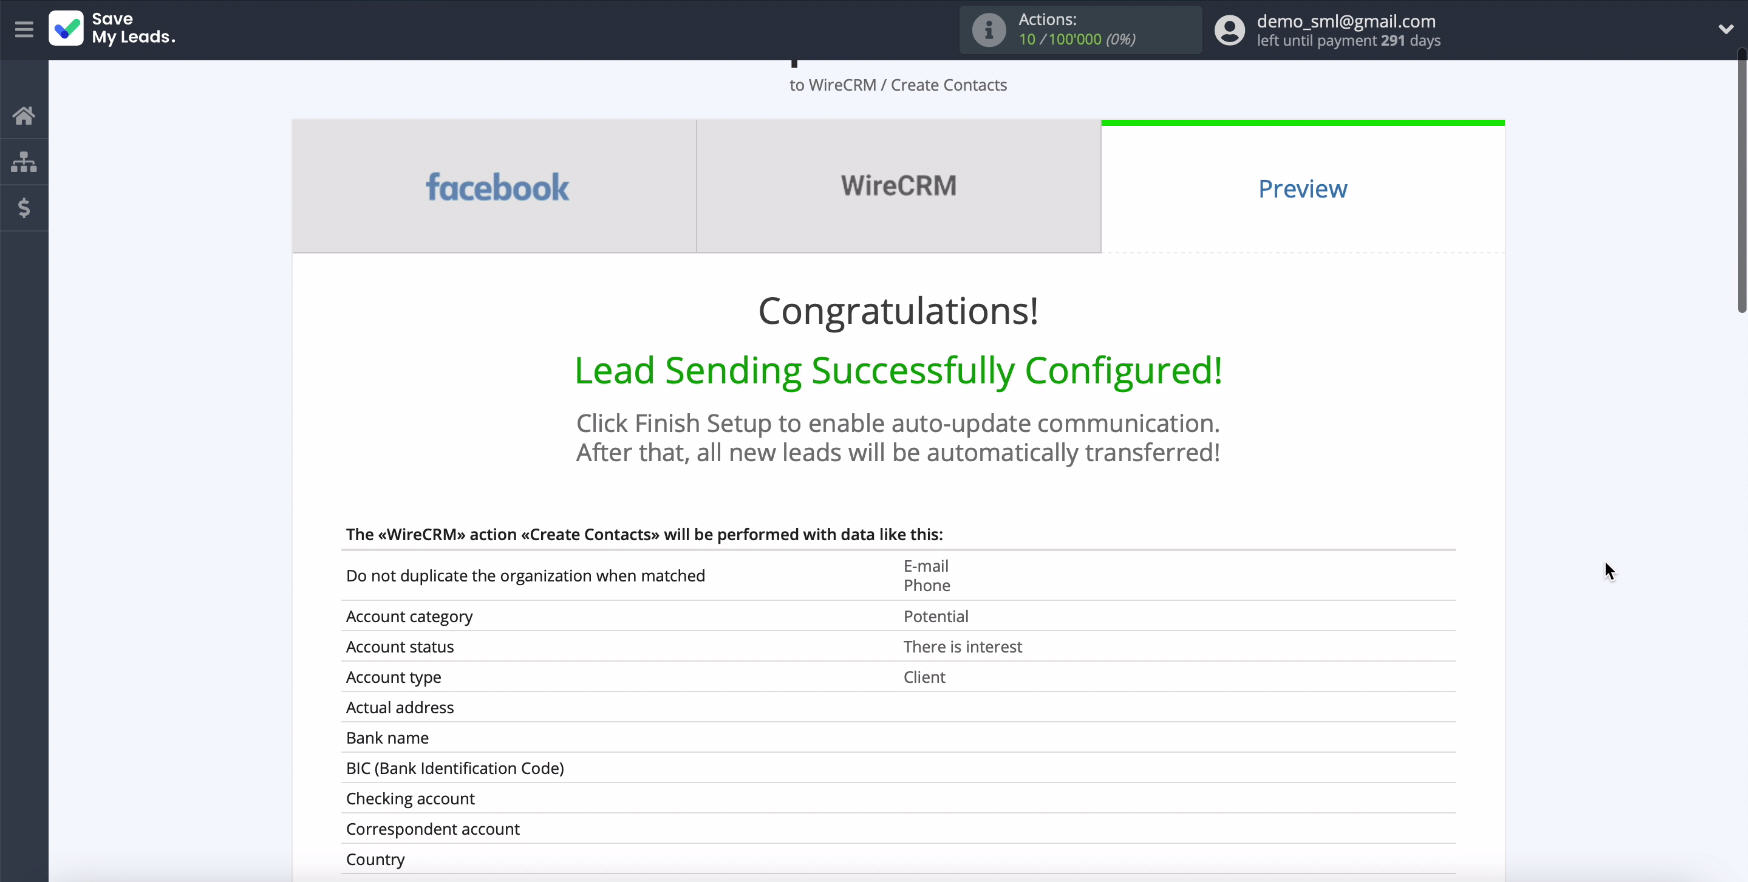 Facebook and WireCRM integration | An example of filling in the fields by contact